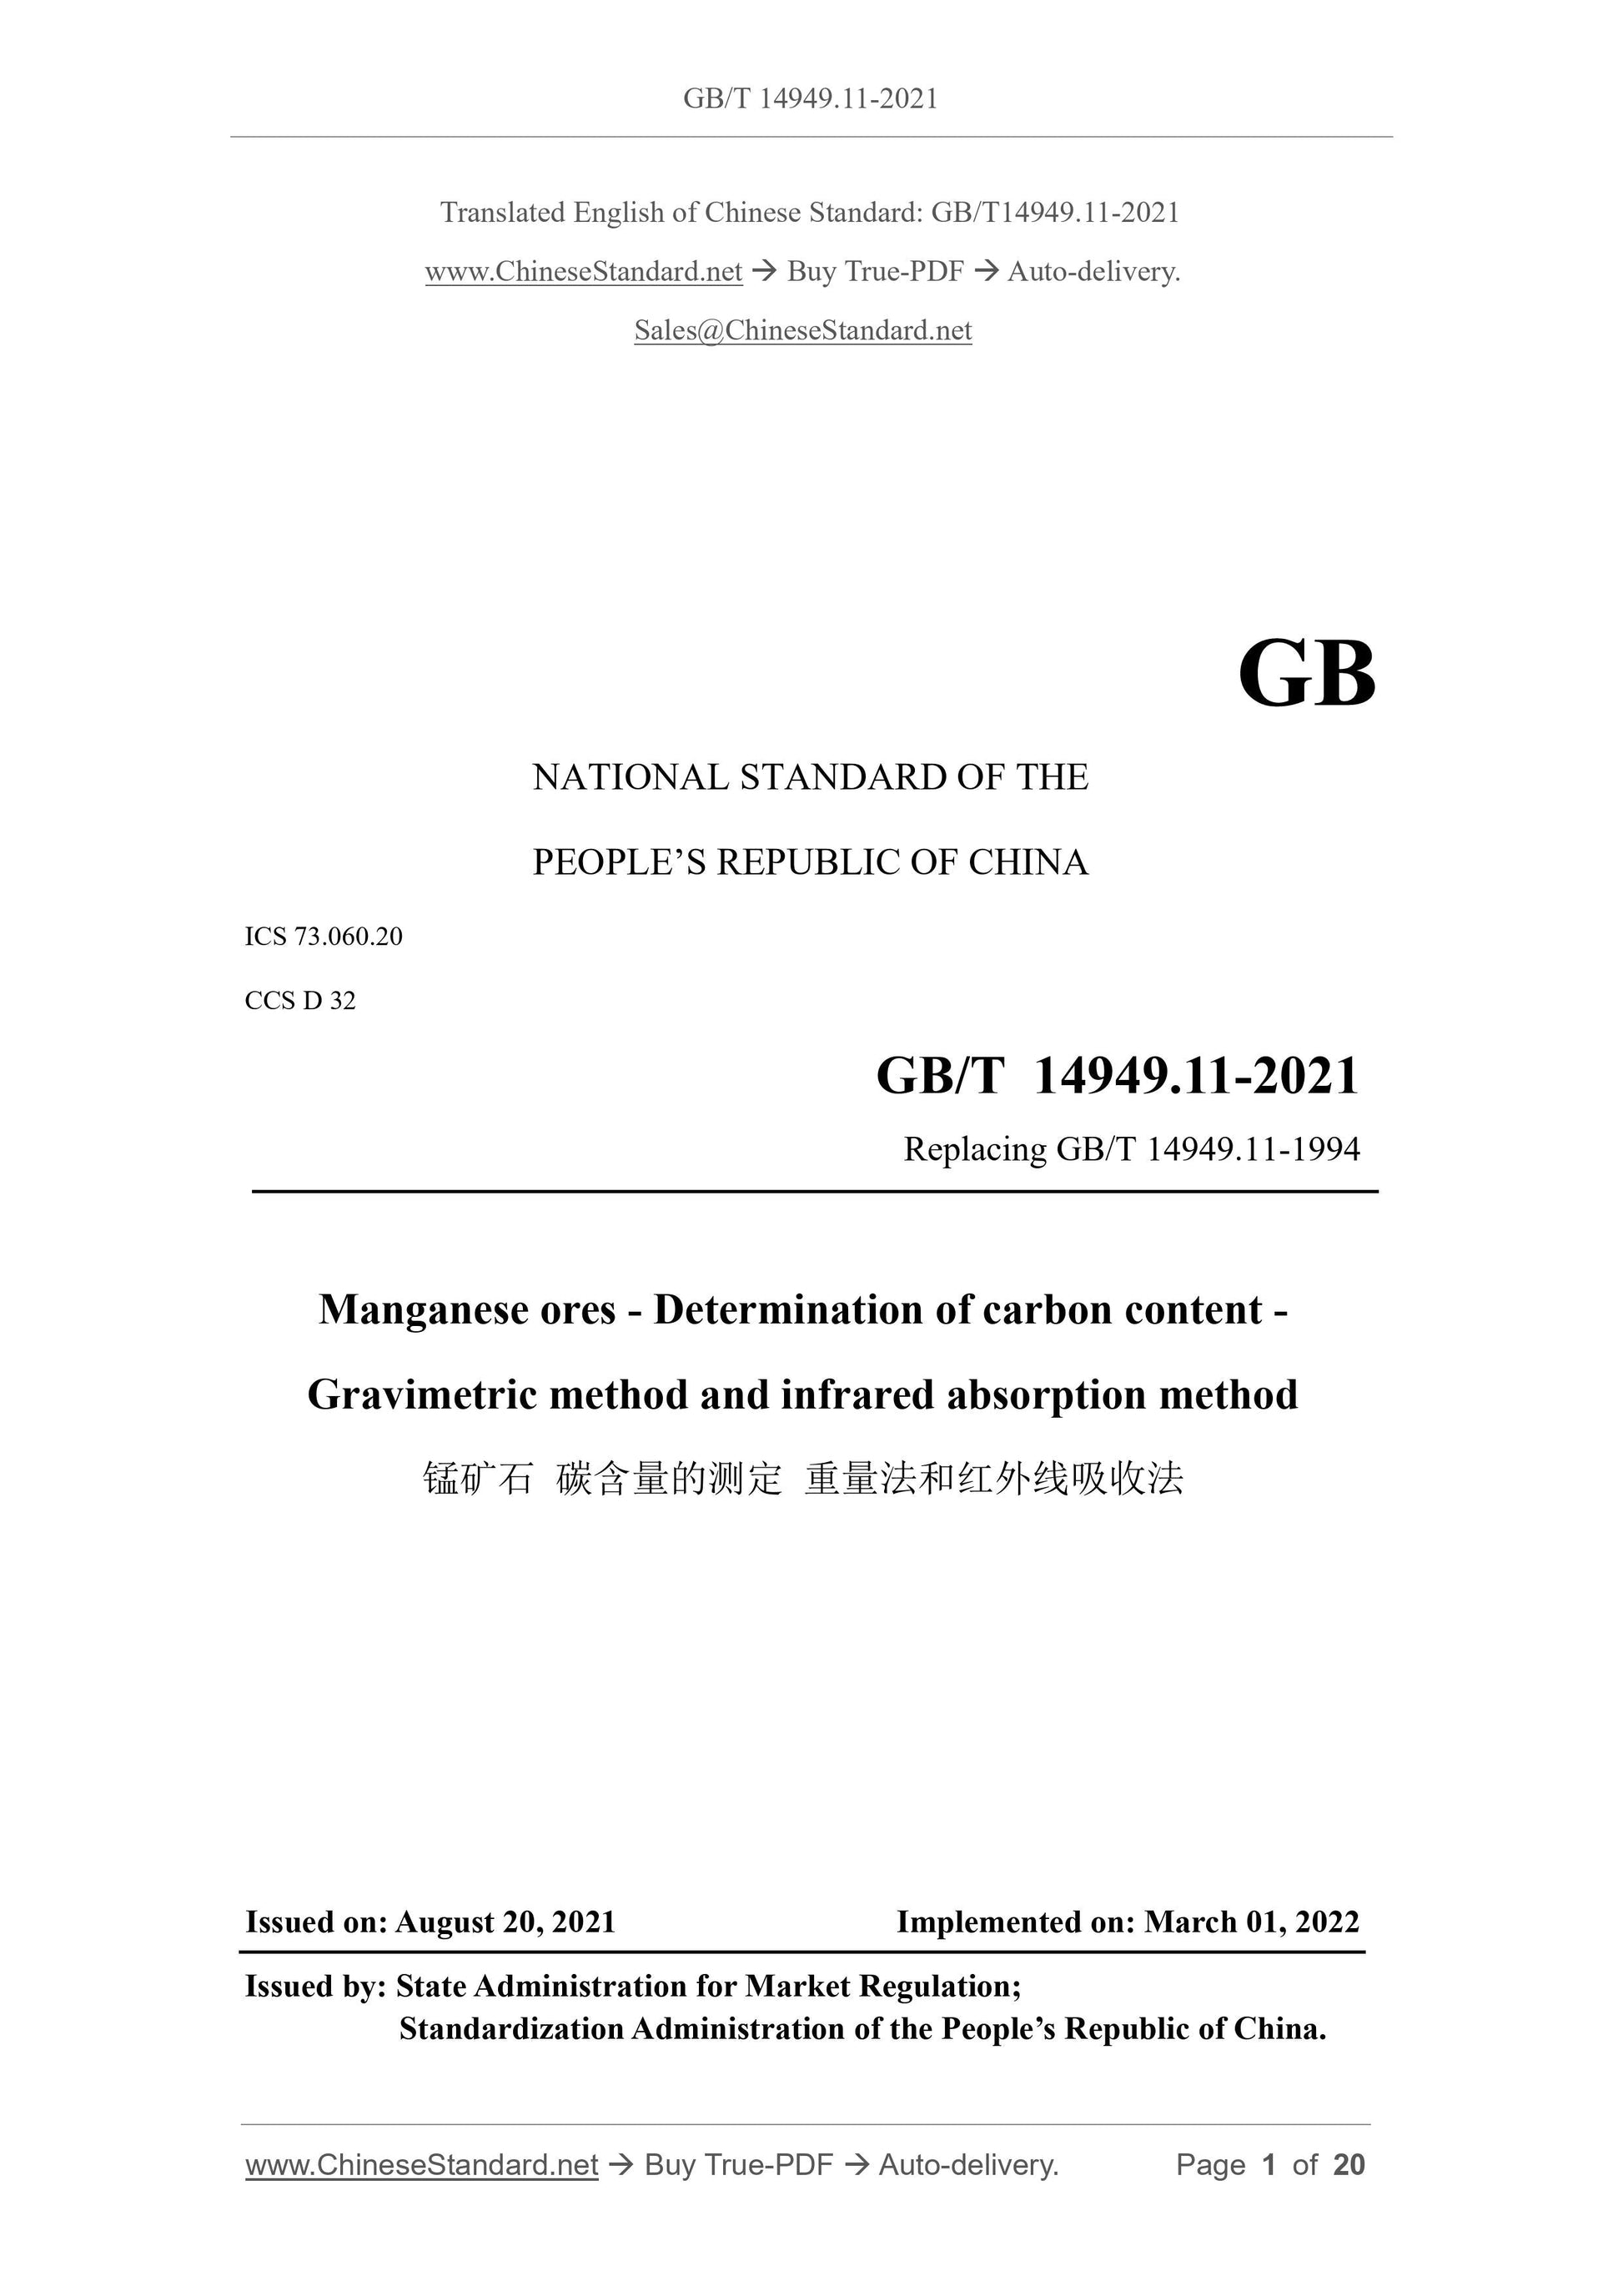 GB/T 14949.11-2021 Page 1